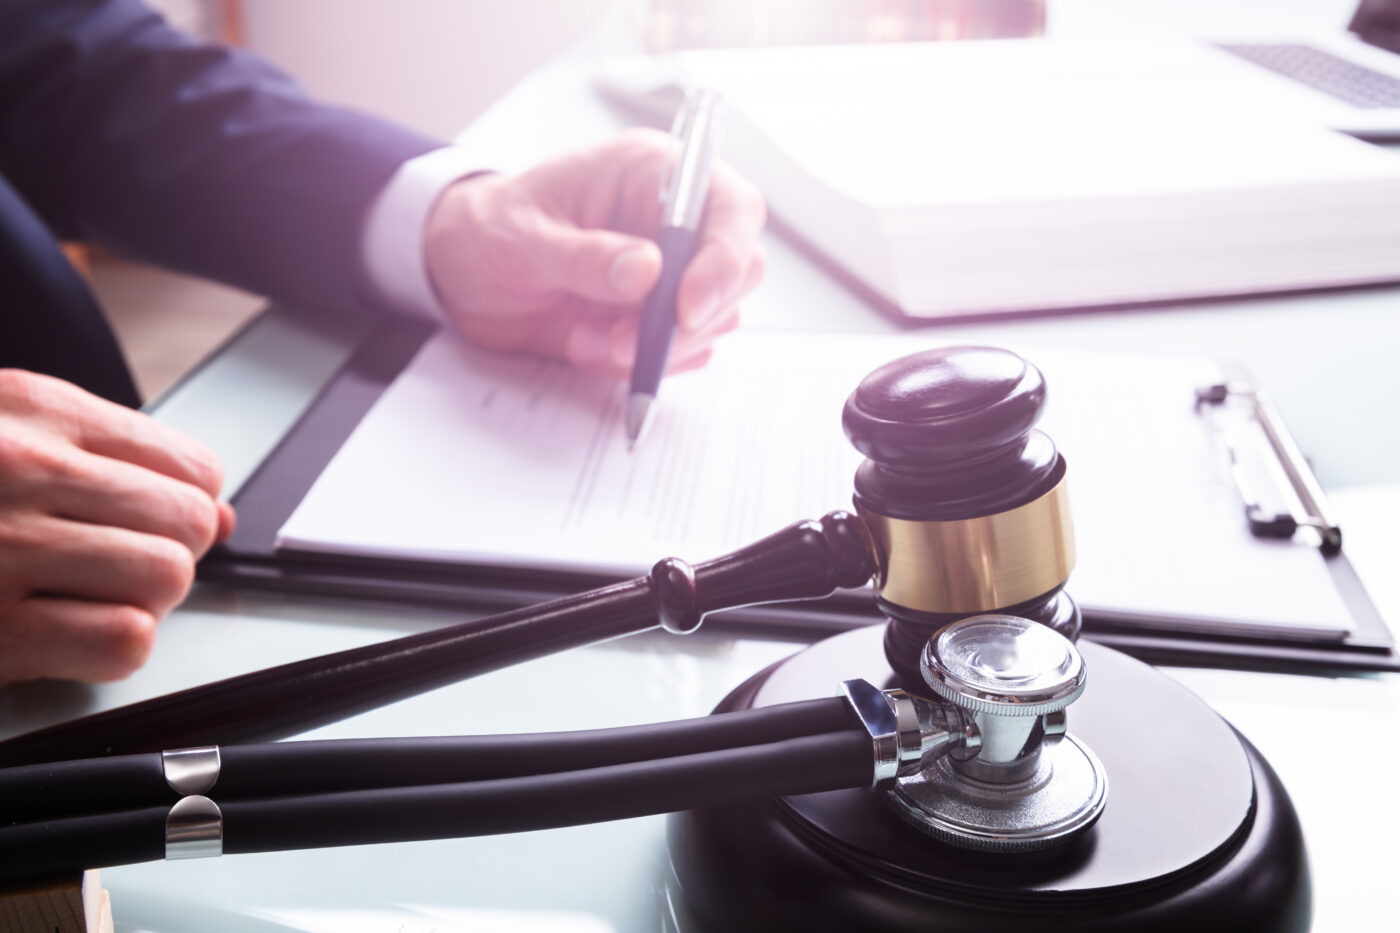 Medical Malpractice and Professional Negligence: What Does It Involve?